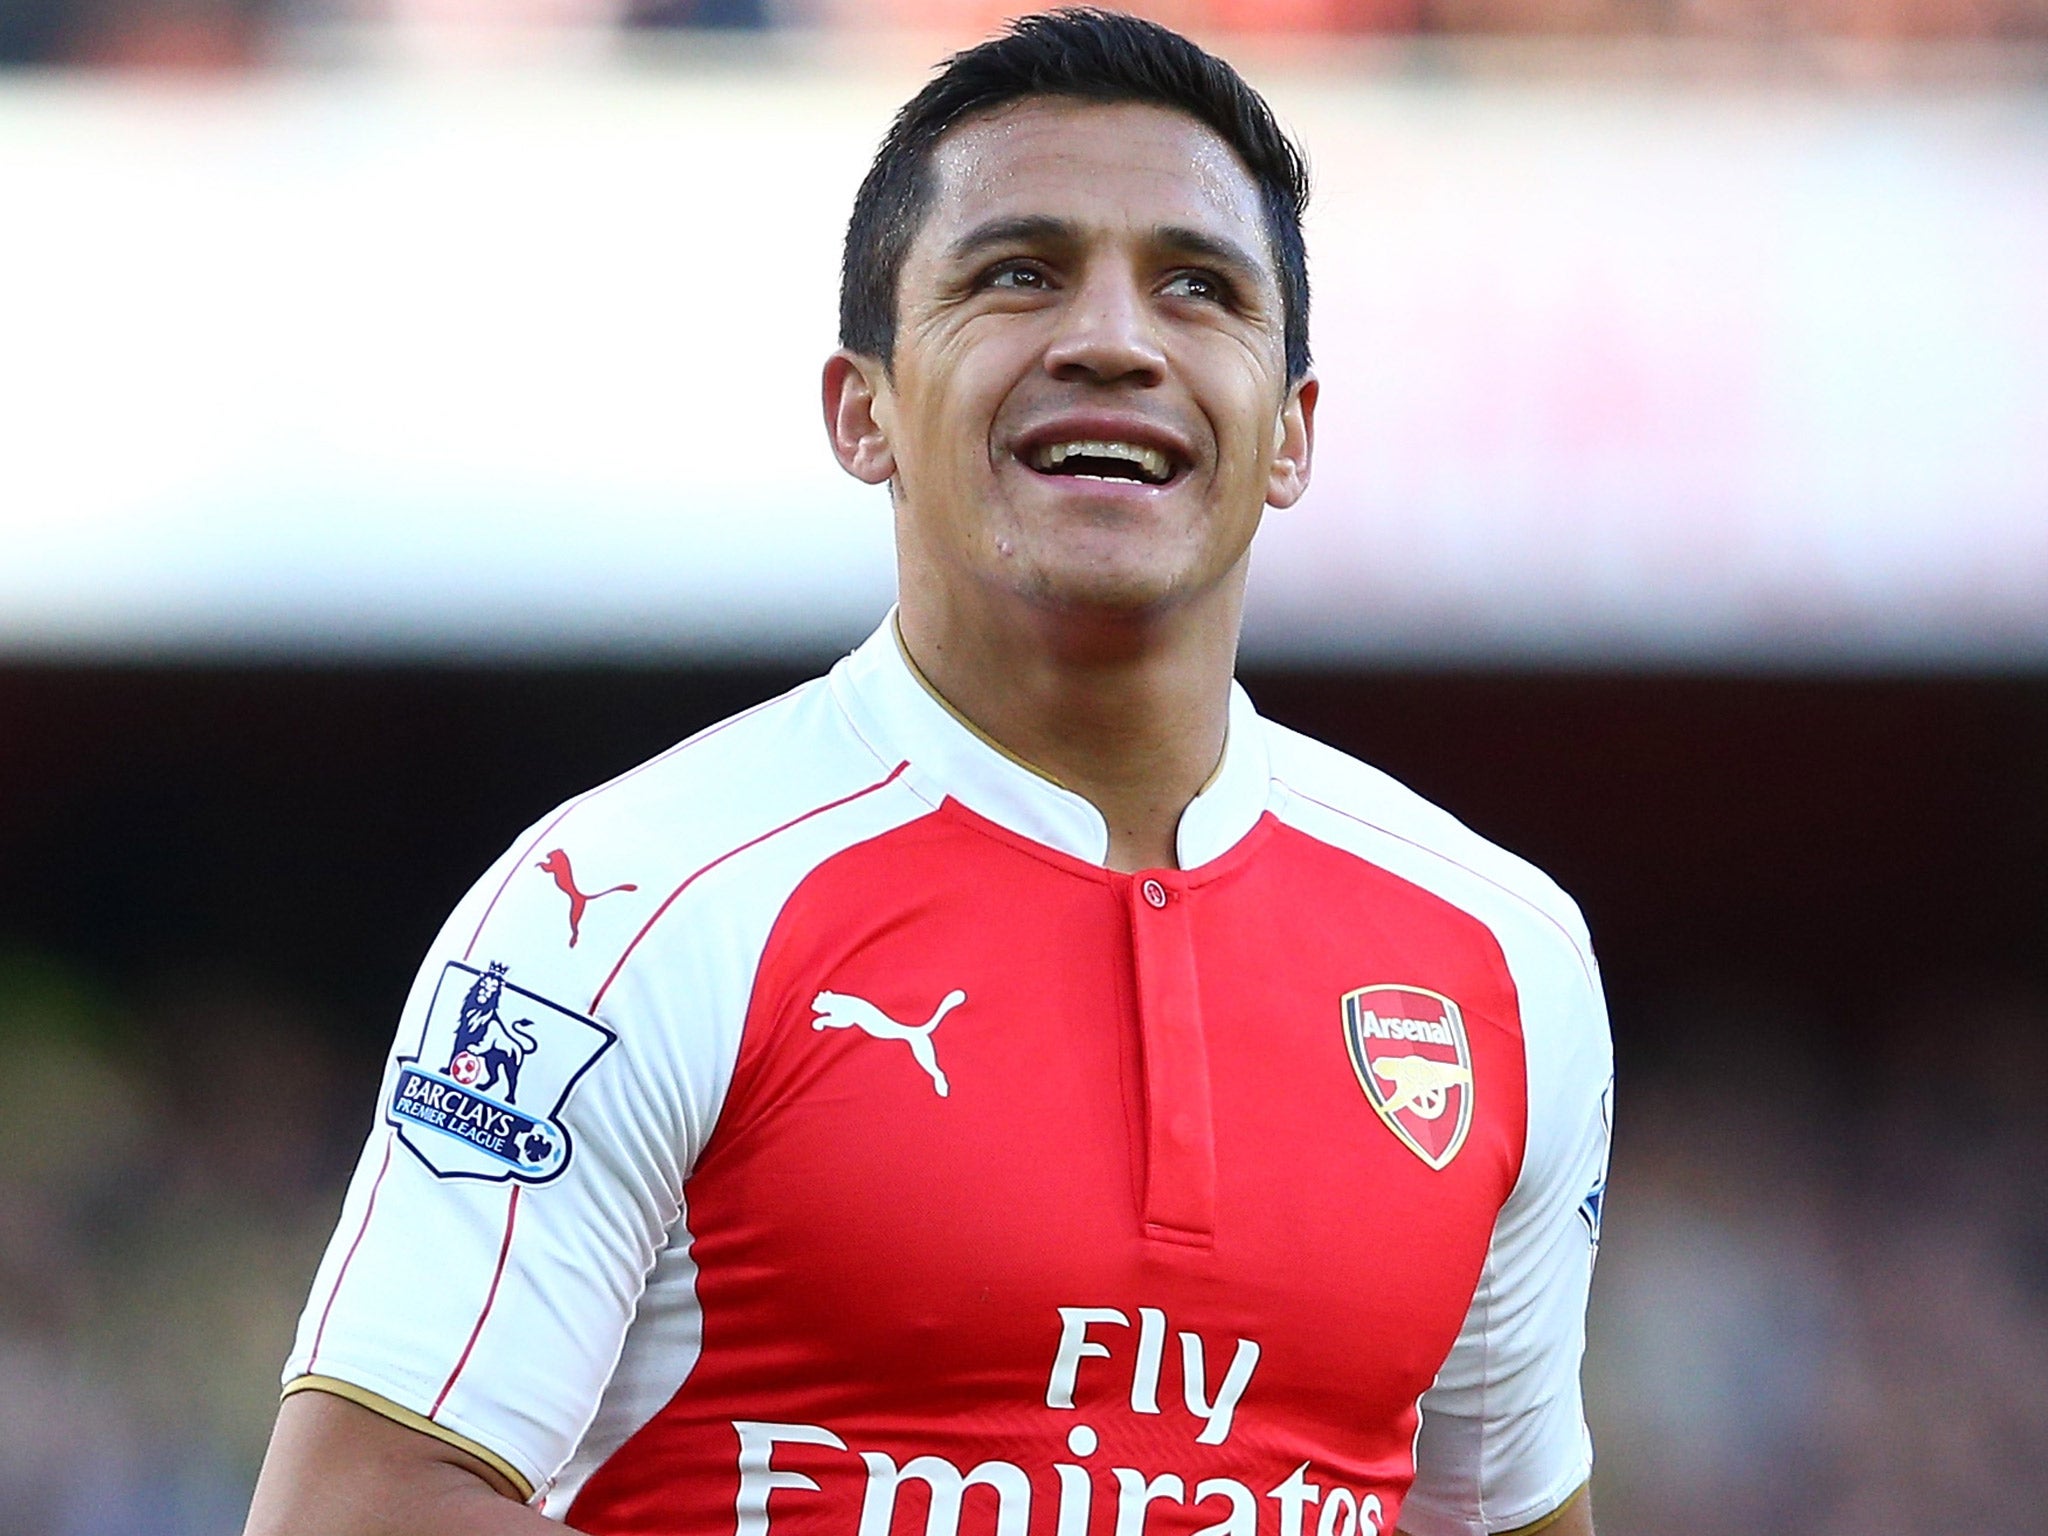 Arsenal forward Alexis Sanchez reportedly stormed out of the Emirates Stadium after the win over Norwich